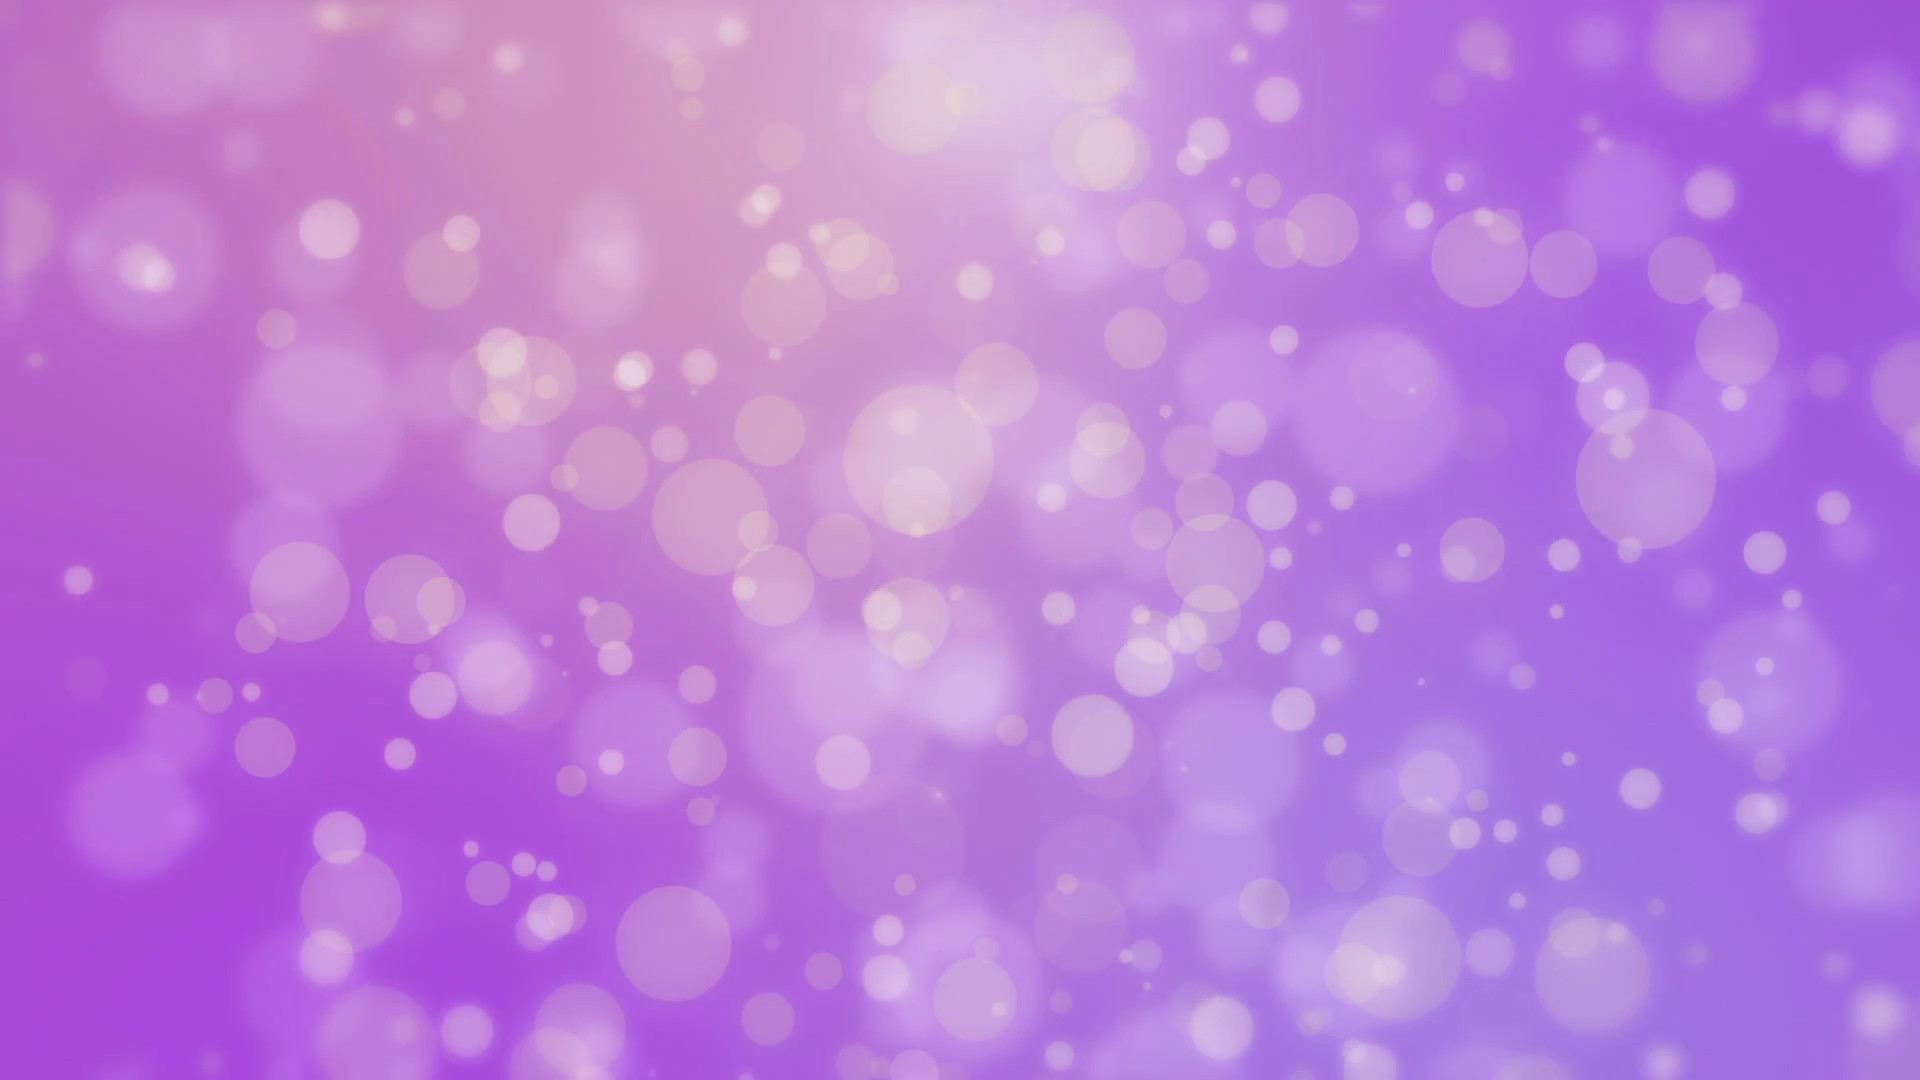 Beautiful purple background with glowing light particles creating a bokeh  effect Motion Background – VideoBlocks